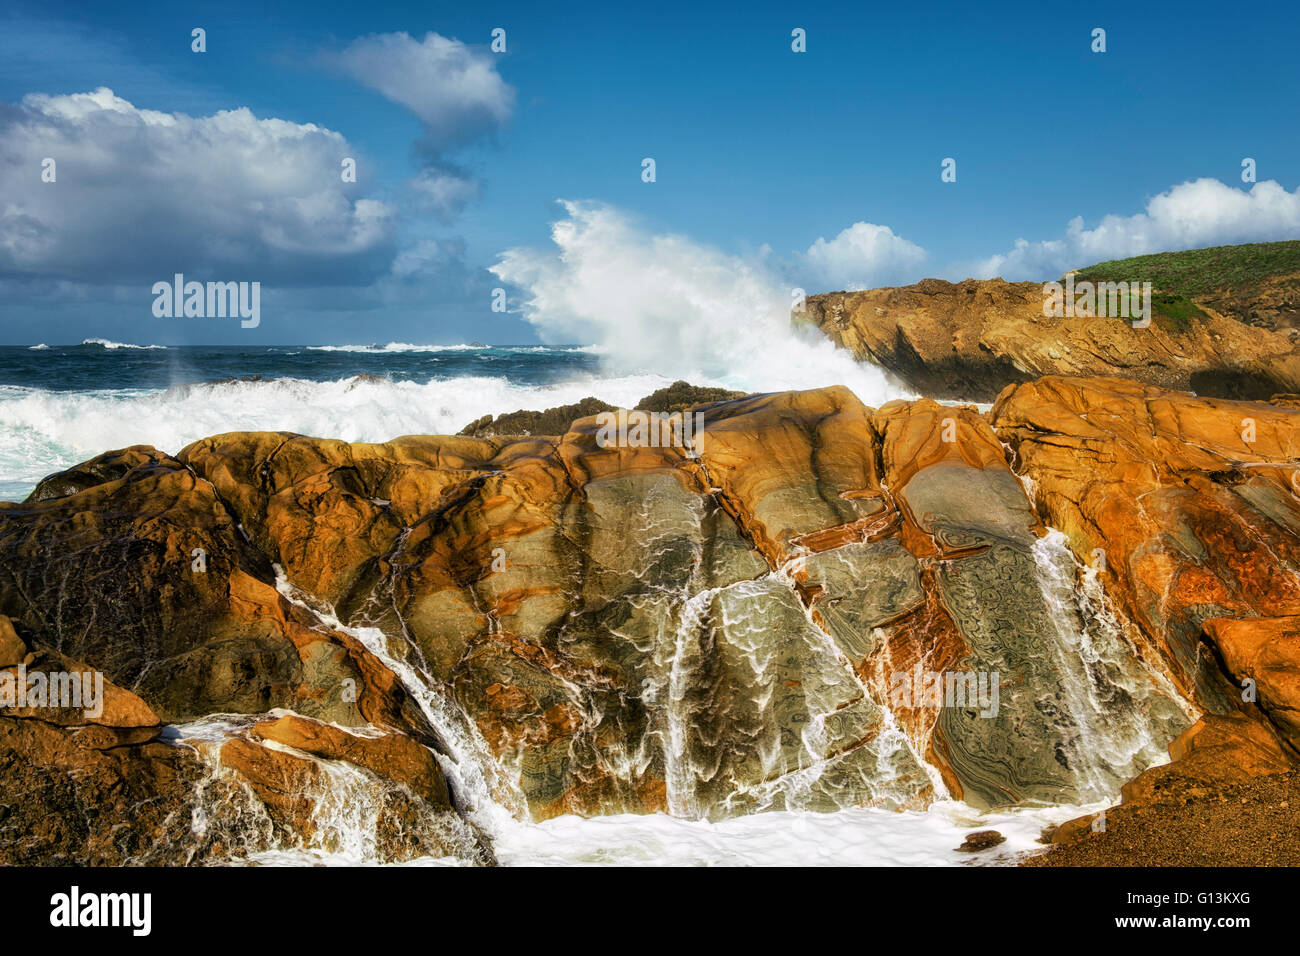 Crashing waves and high surf pound the sandstone cliffs of Point Lobos State Natural Reserve on California’s Big Sur coastline. Stock Photo